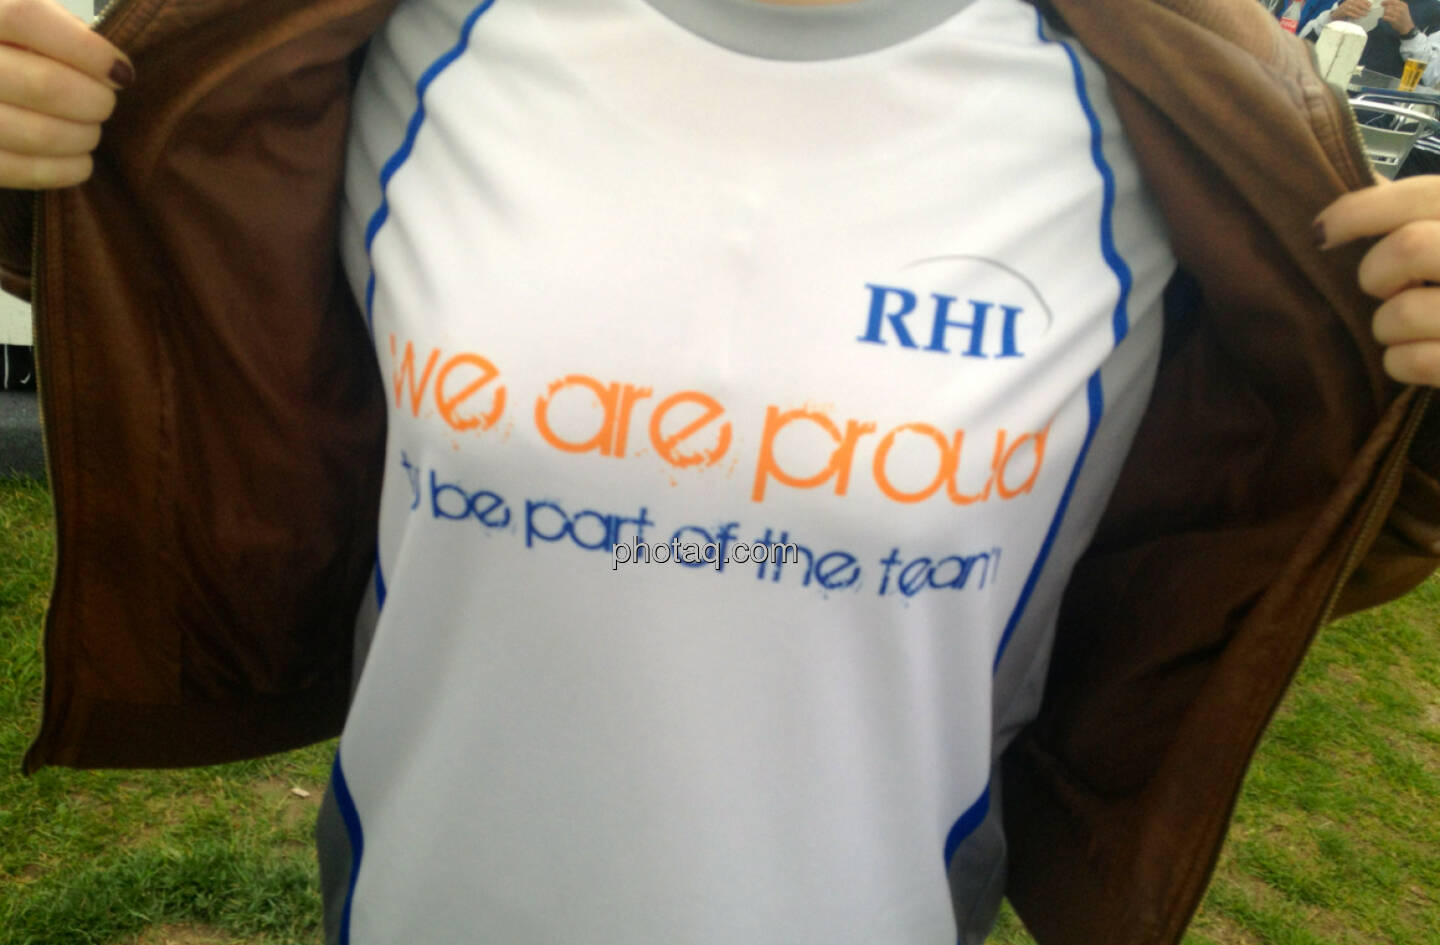 RHI - we are proud to bei part of the team